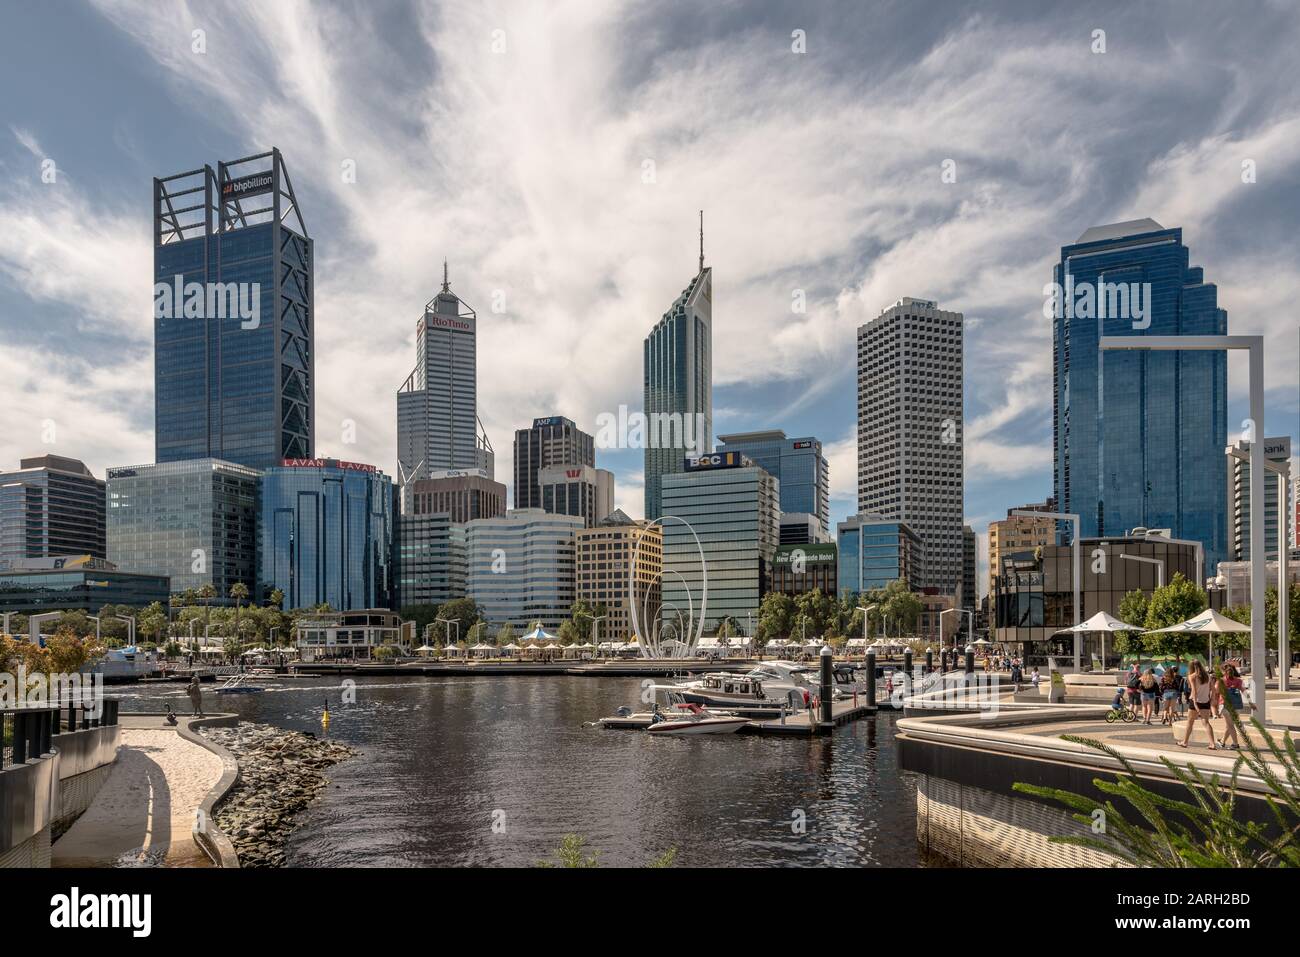 The skyscrapers of Perth's central business district with Elizabeth Quar in the foreground Stock Photo